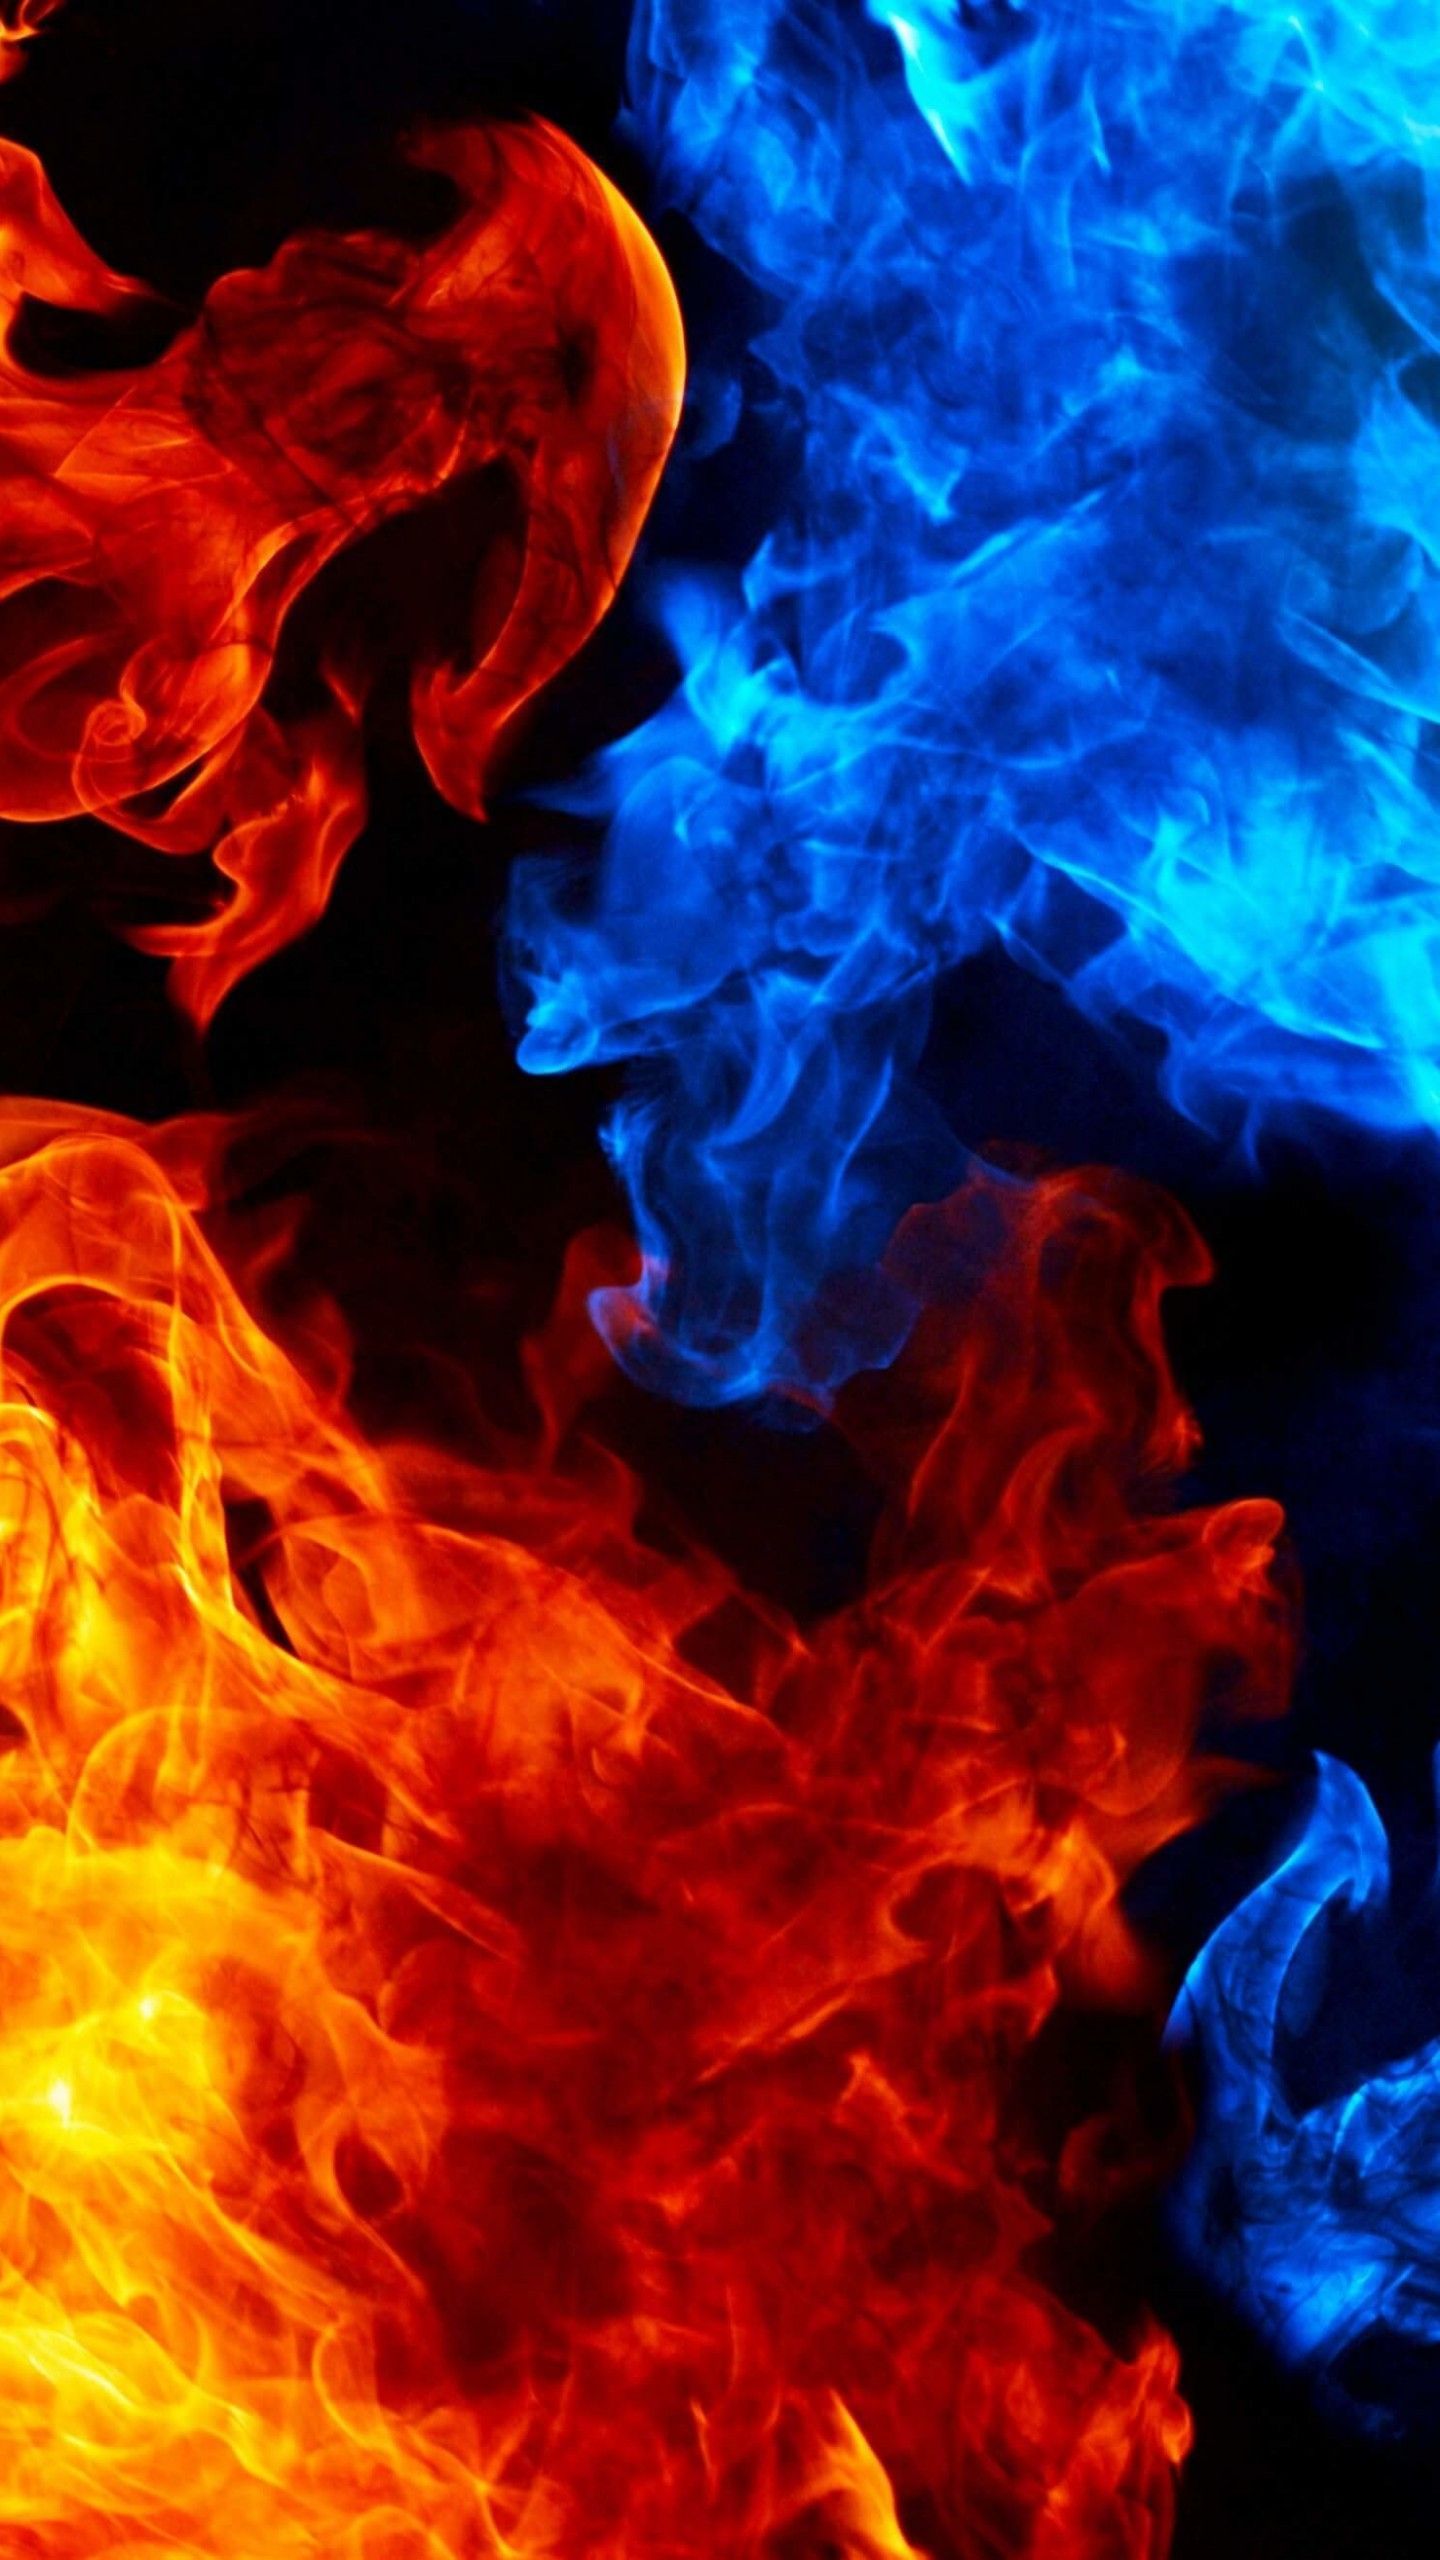 Red And Blue Fire Wallpaper #wallpaper. Red wallpaper